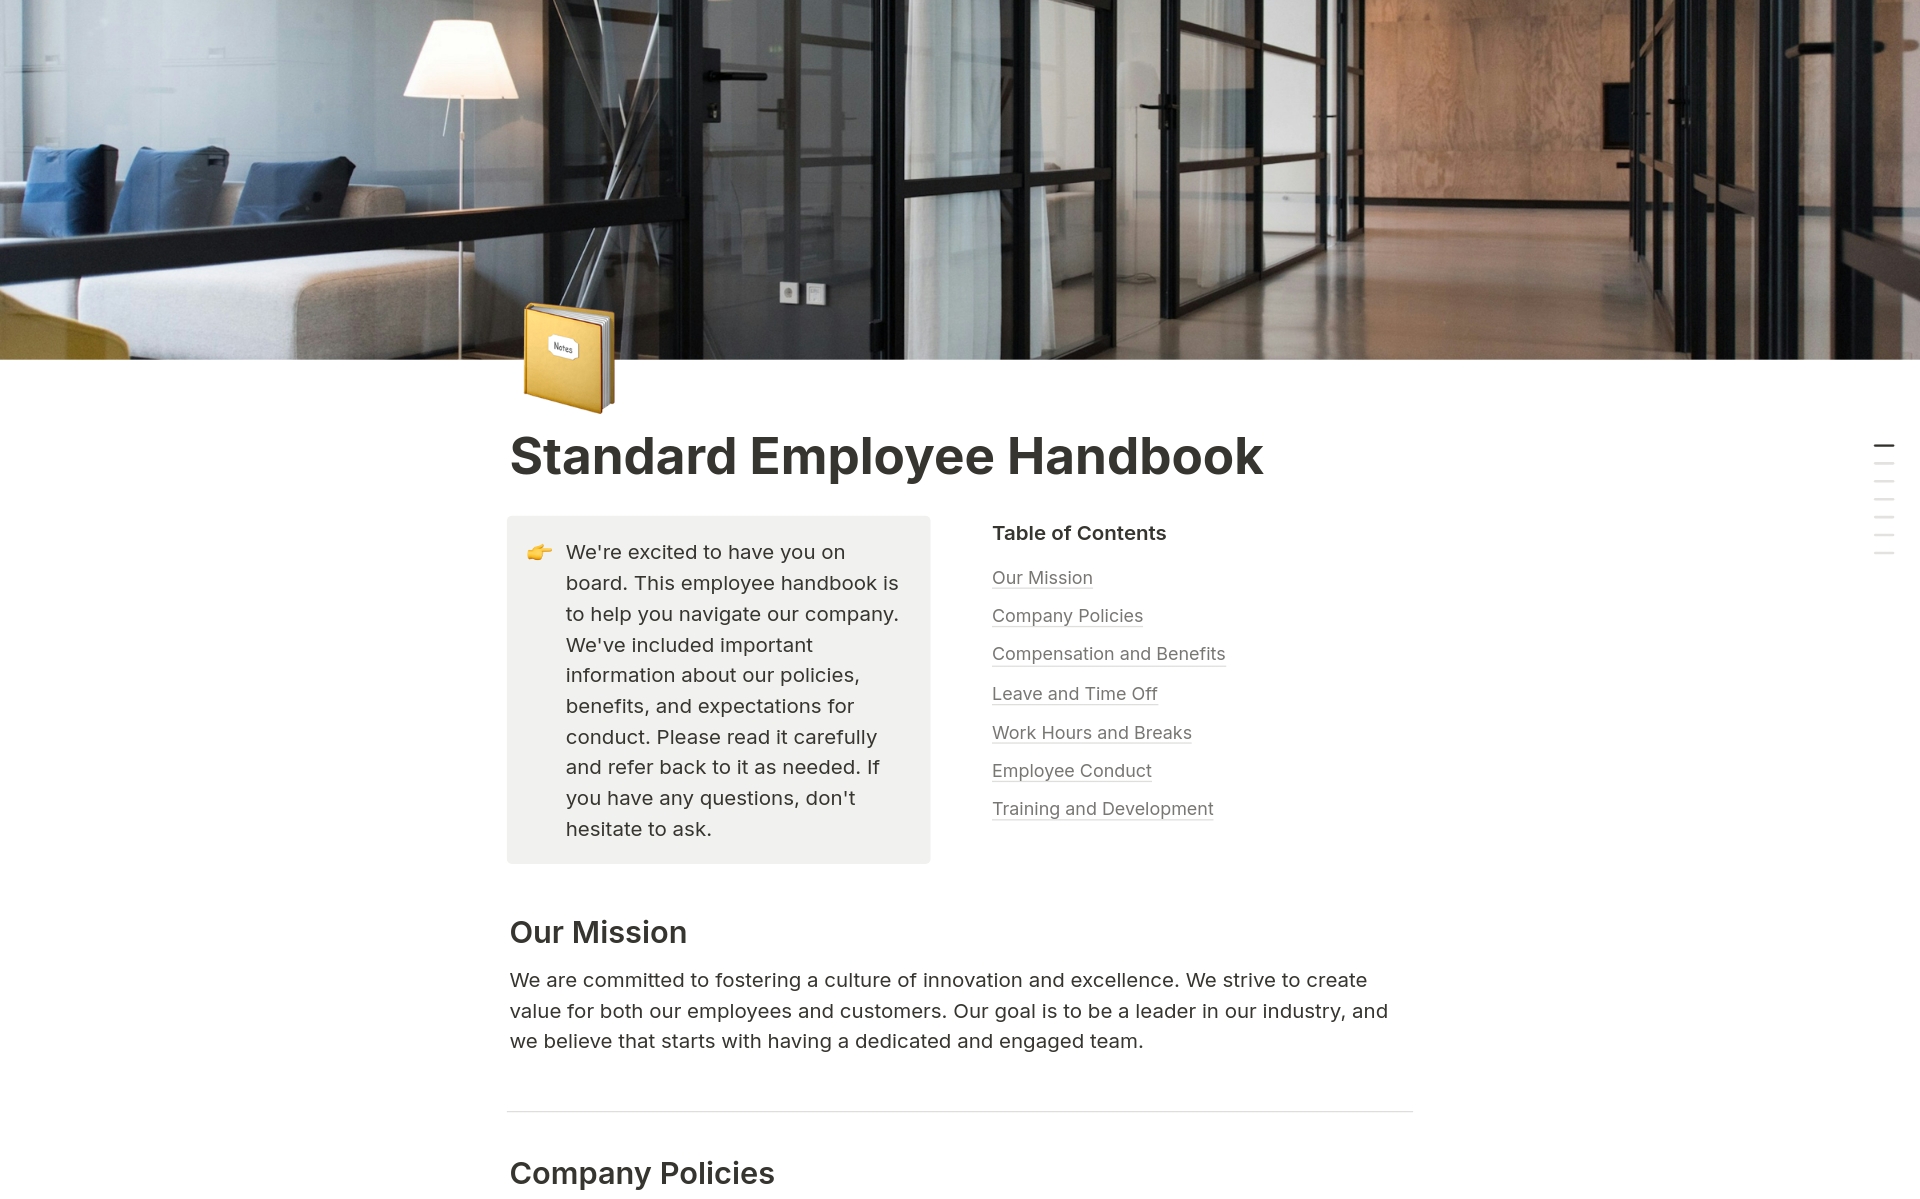 Comprehensive guide for corporate employees, covering policies, procedures, and company culture in a structured format.